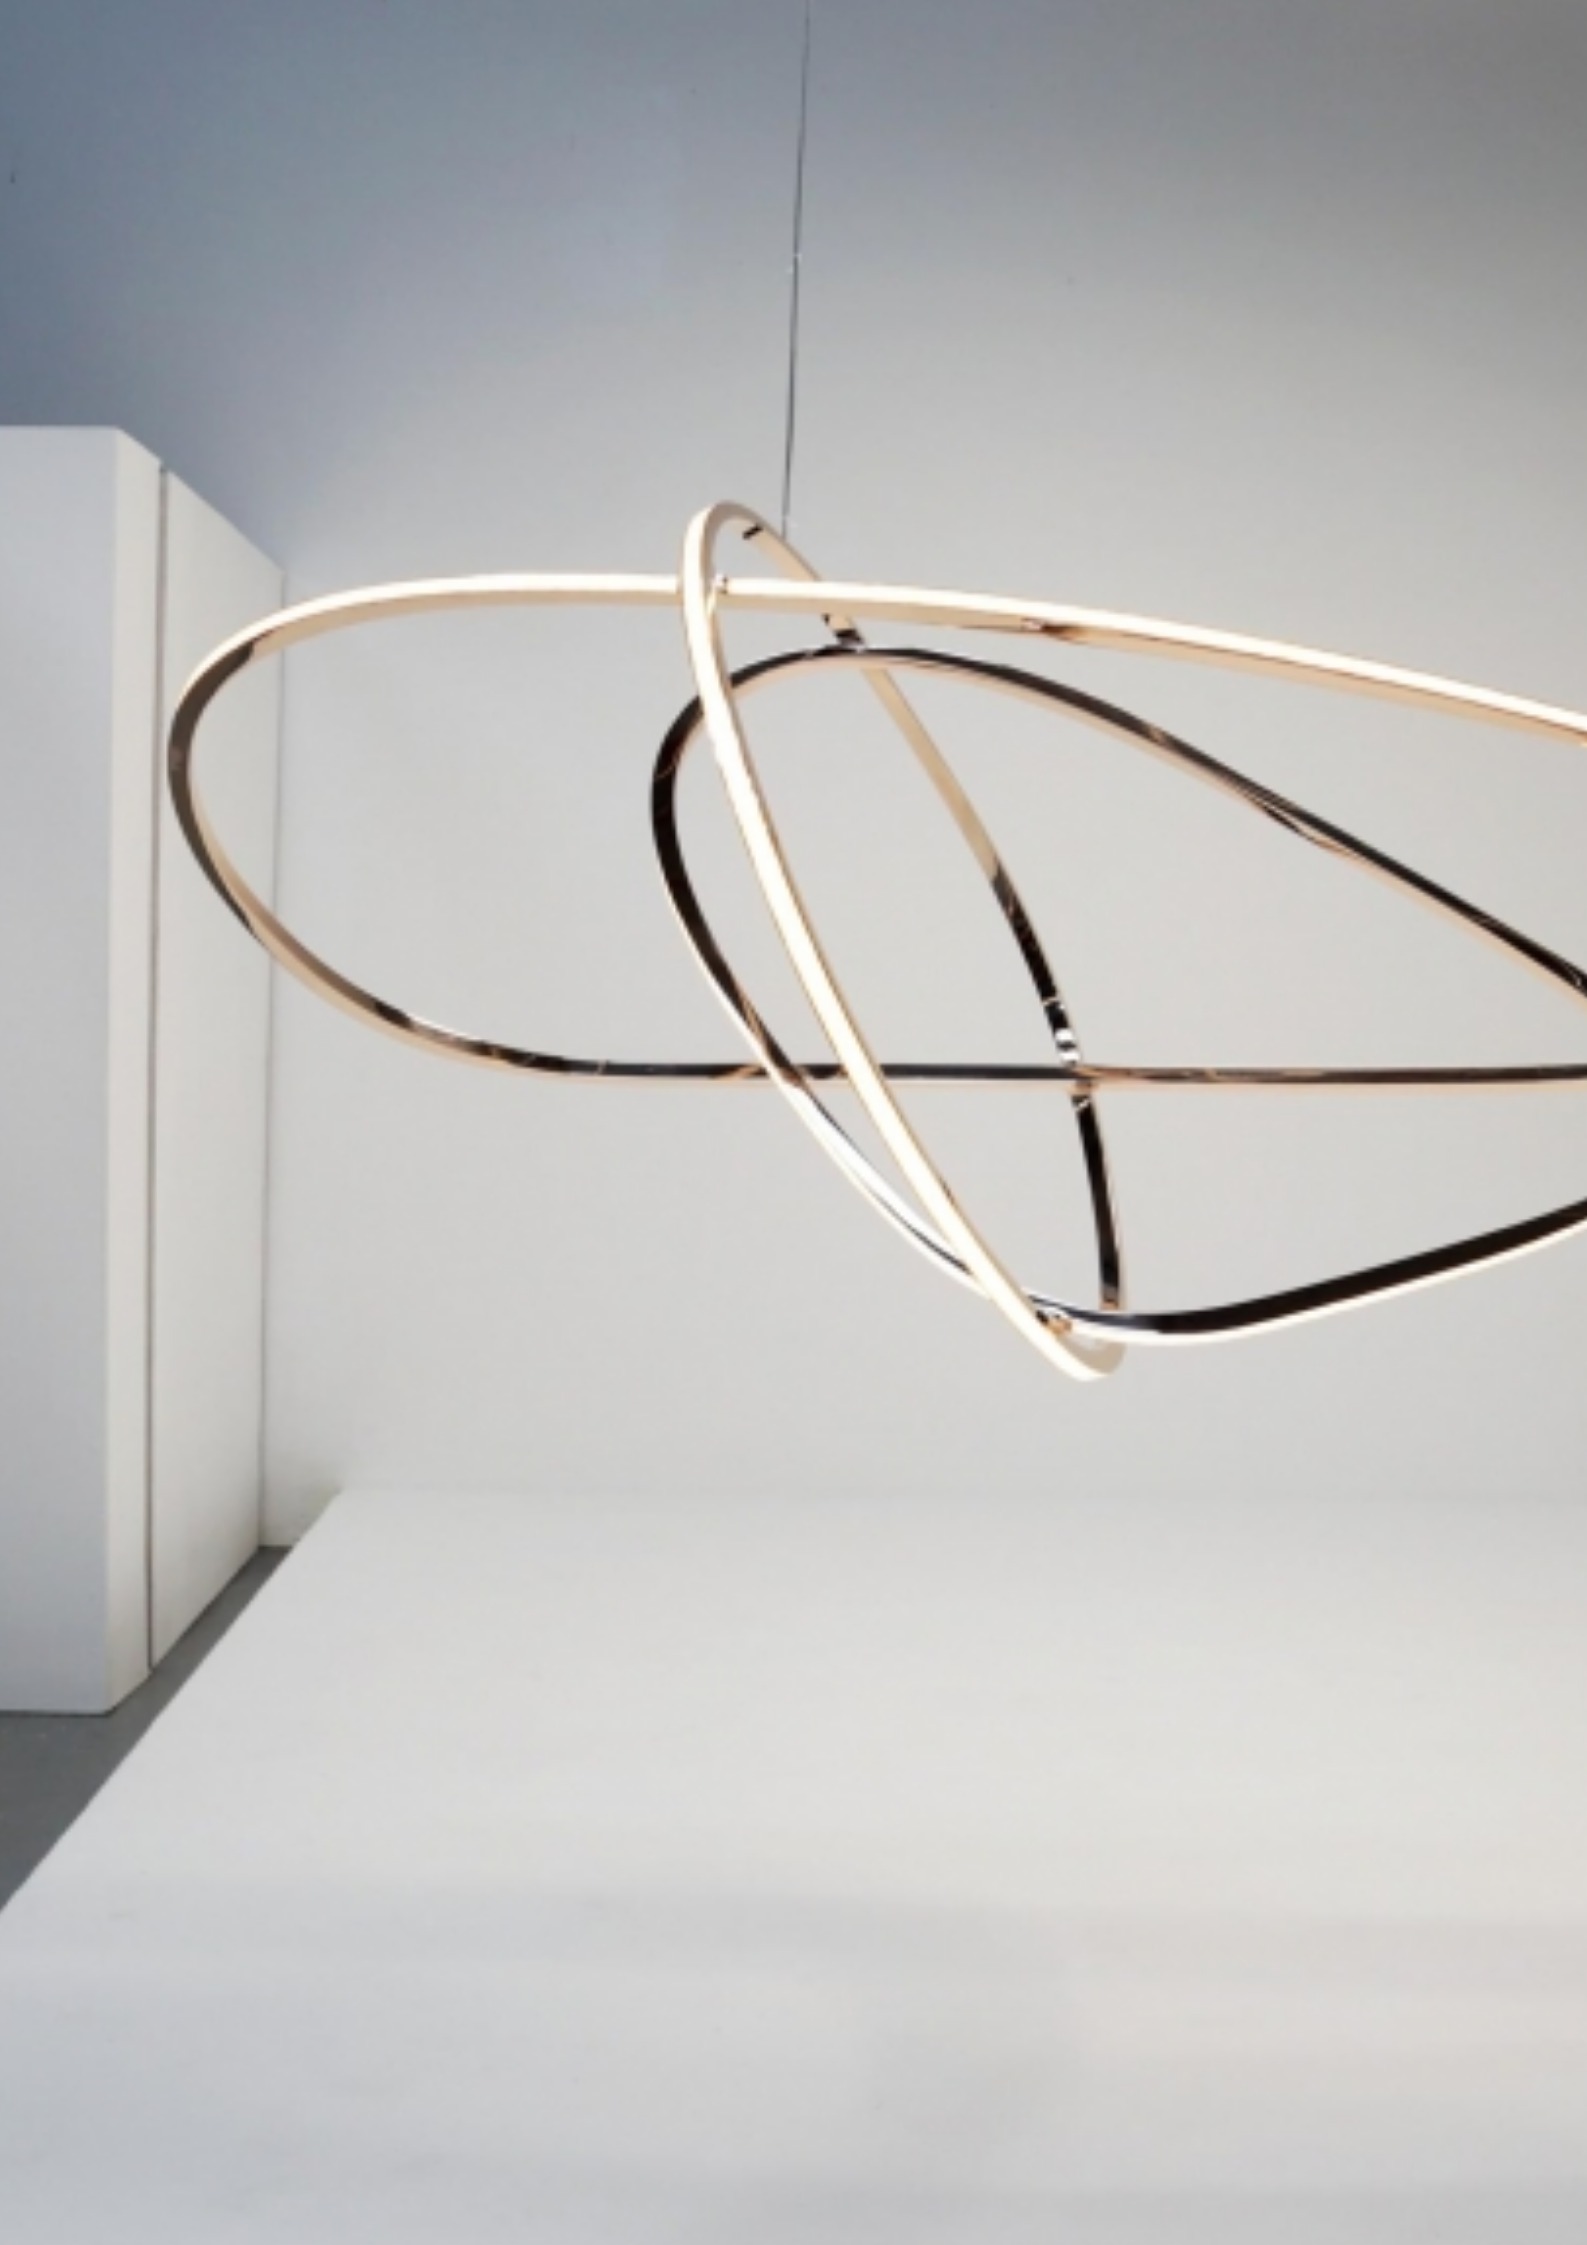 06 Fascinating Known Lighting Designers By Creativemary